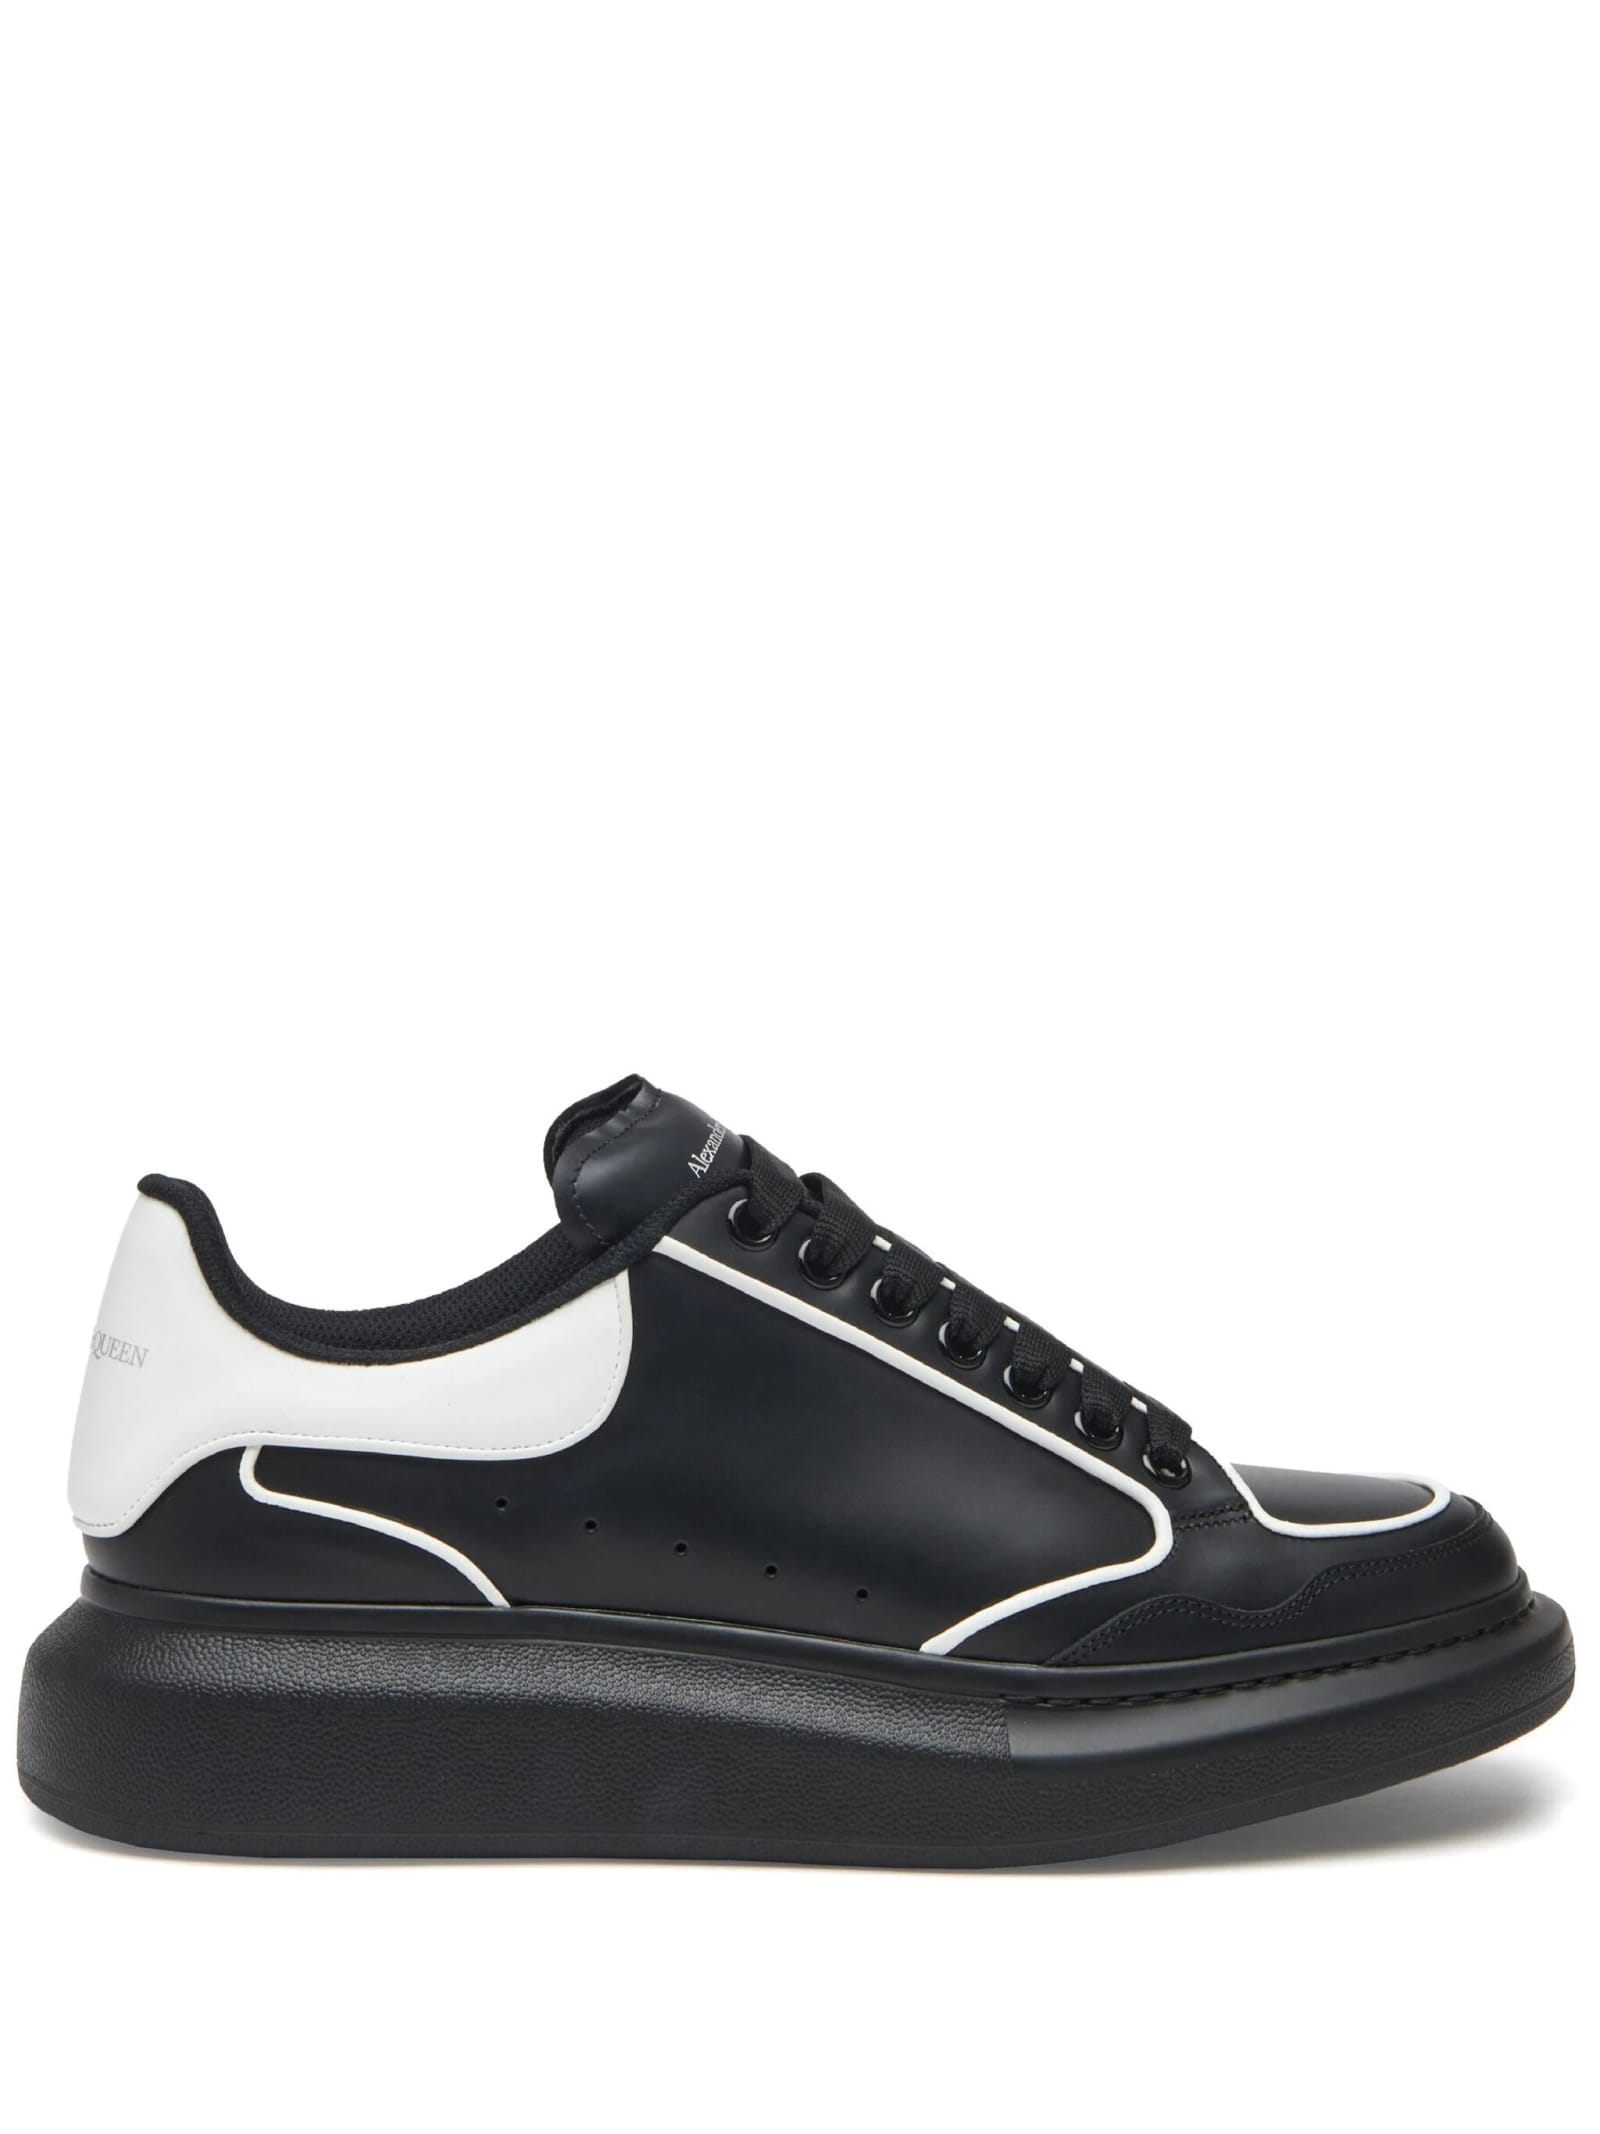 Shop Alexander Mcqueen Oversized Sneakers In Black And White